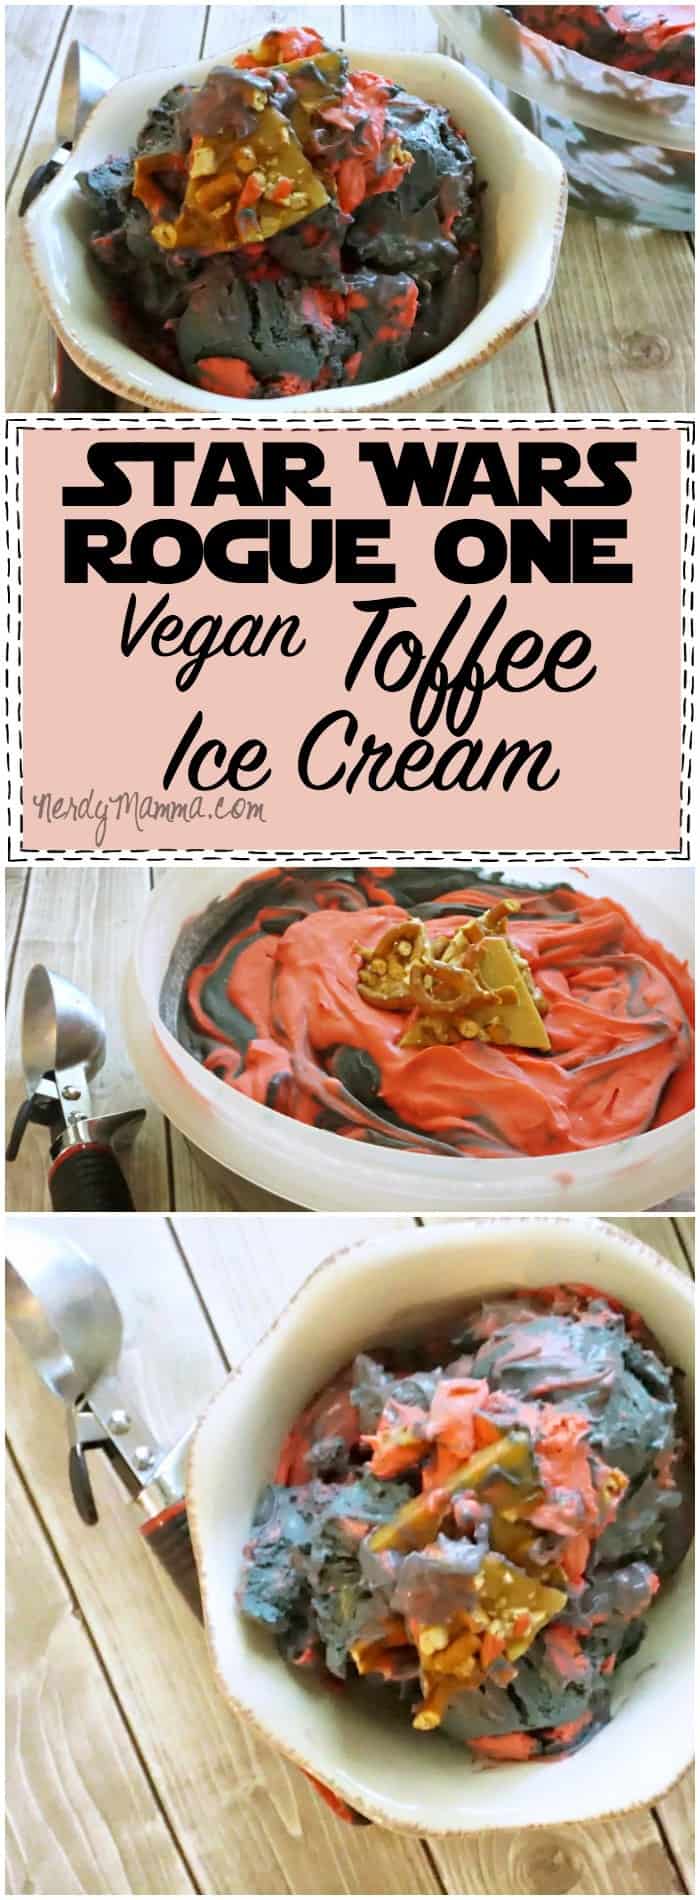 This awesome recipe for Star Wars Rogue One Vegan Toffee Ice Cream is so easy--and my kids are going to flip over the idea...and my hubby is going to flip over the FLAVOR! I love it!